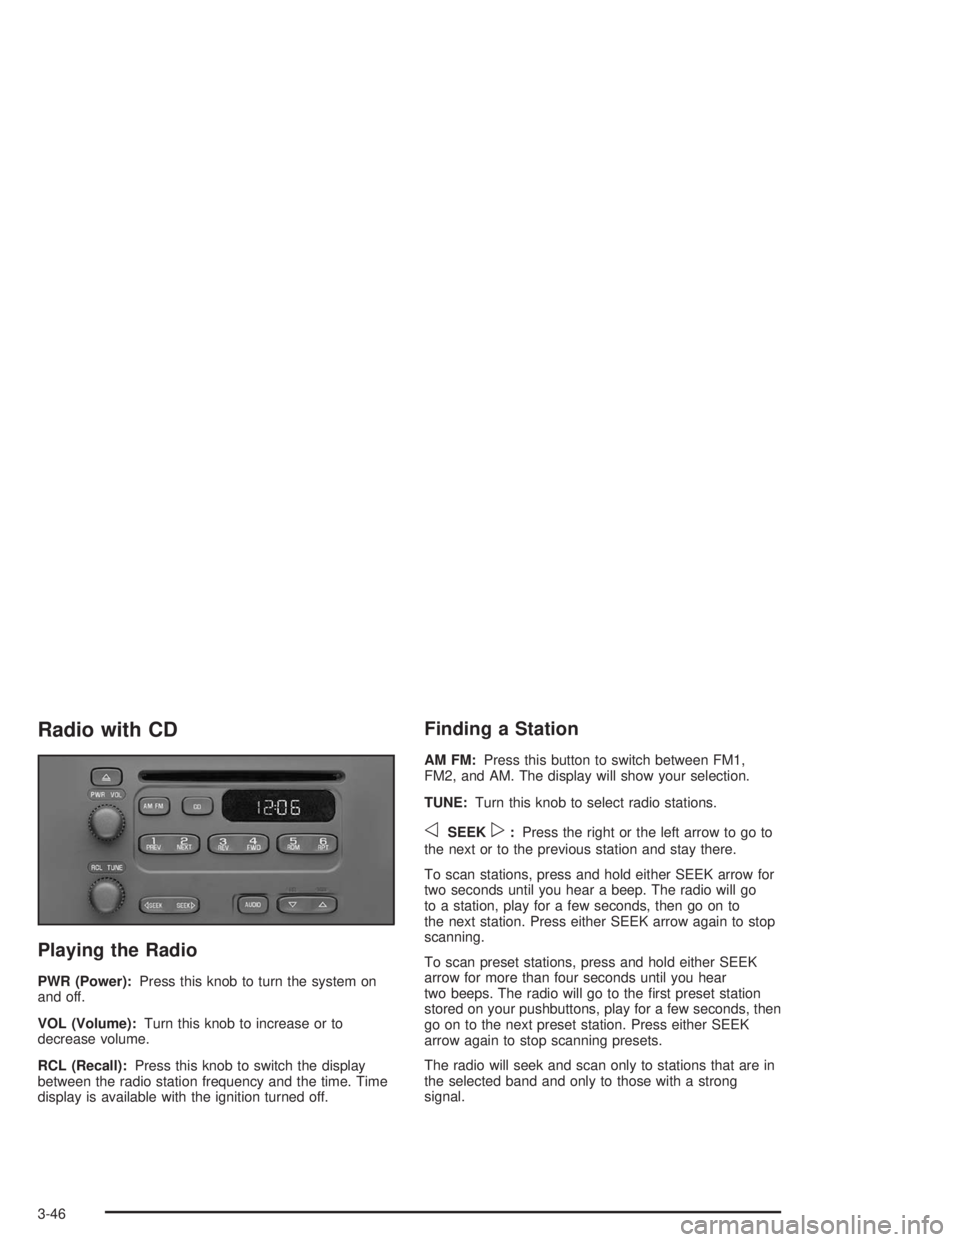 GMC SAVANA 2004  Owners Manual Radio with CD
Playing the Radio
PWR (Power):Press this knob to turn the system on
and off.
VOL (Volume):Turn this knob to increase or to
decrease volume.
RCL (Recall):Press this knob to switch the dis